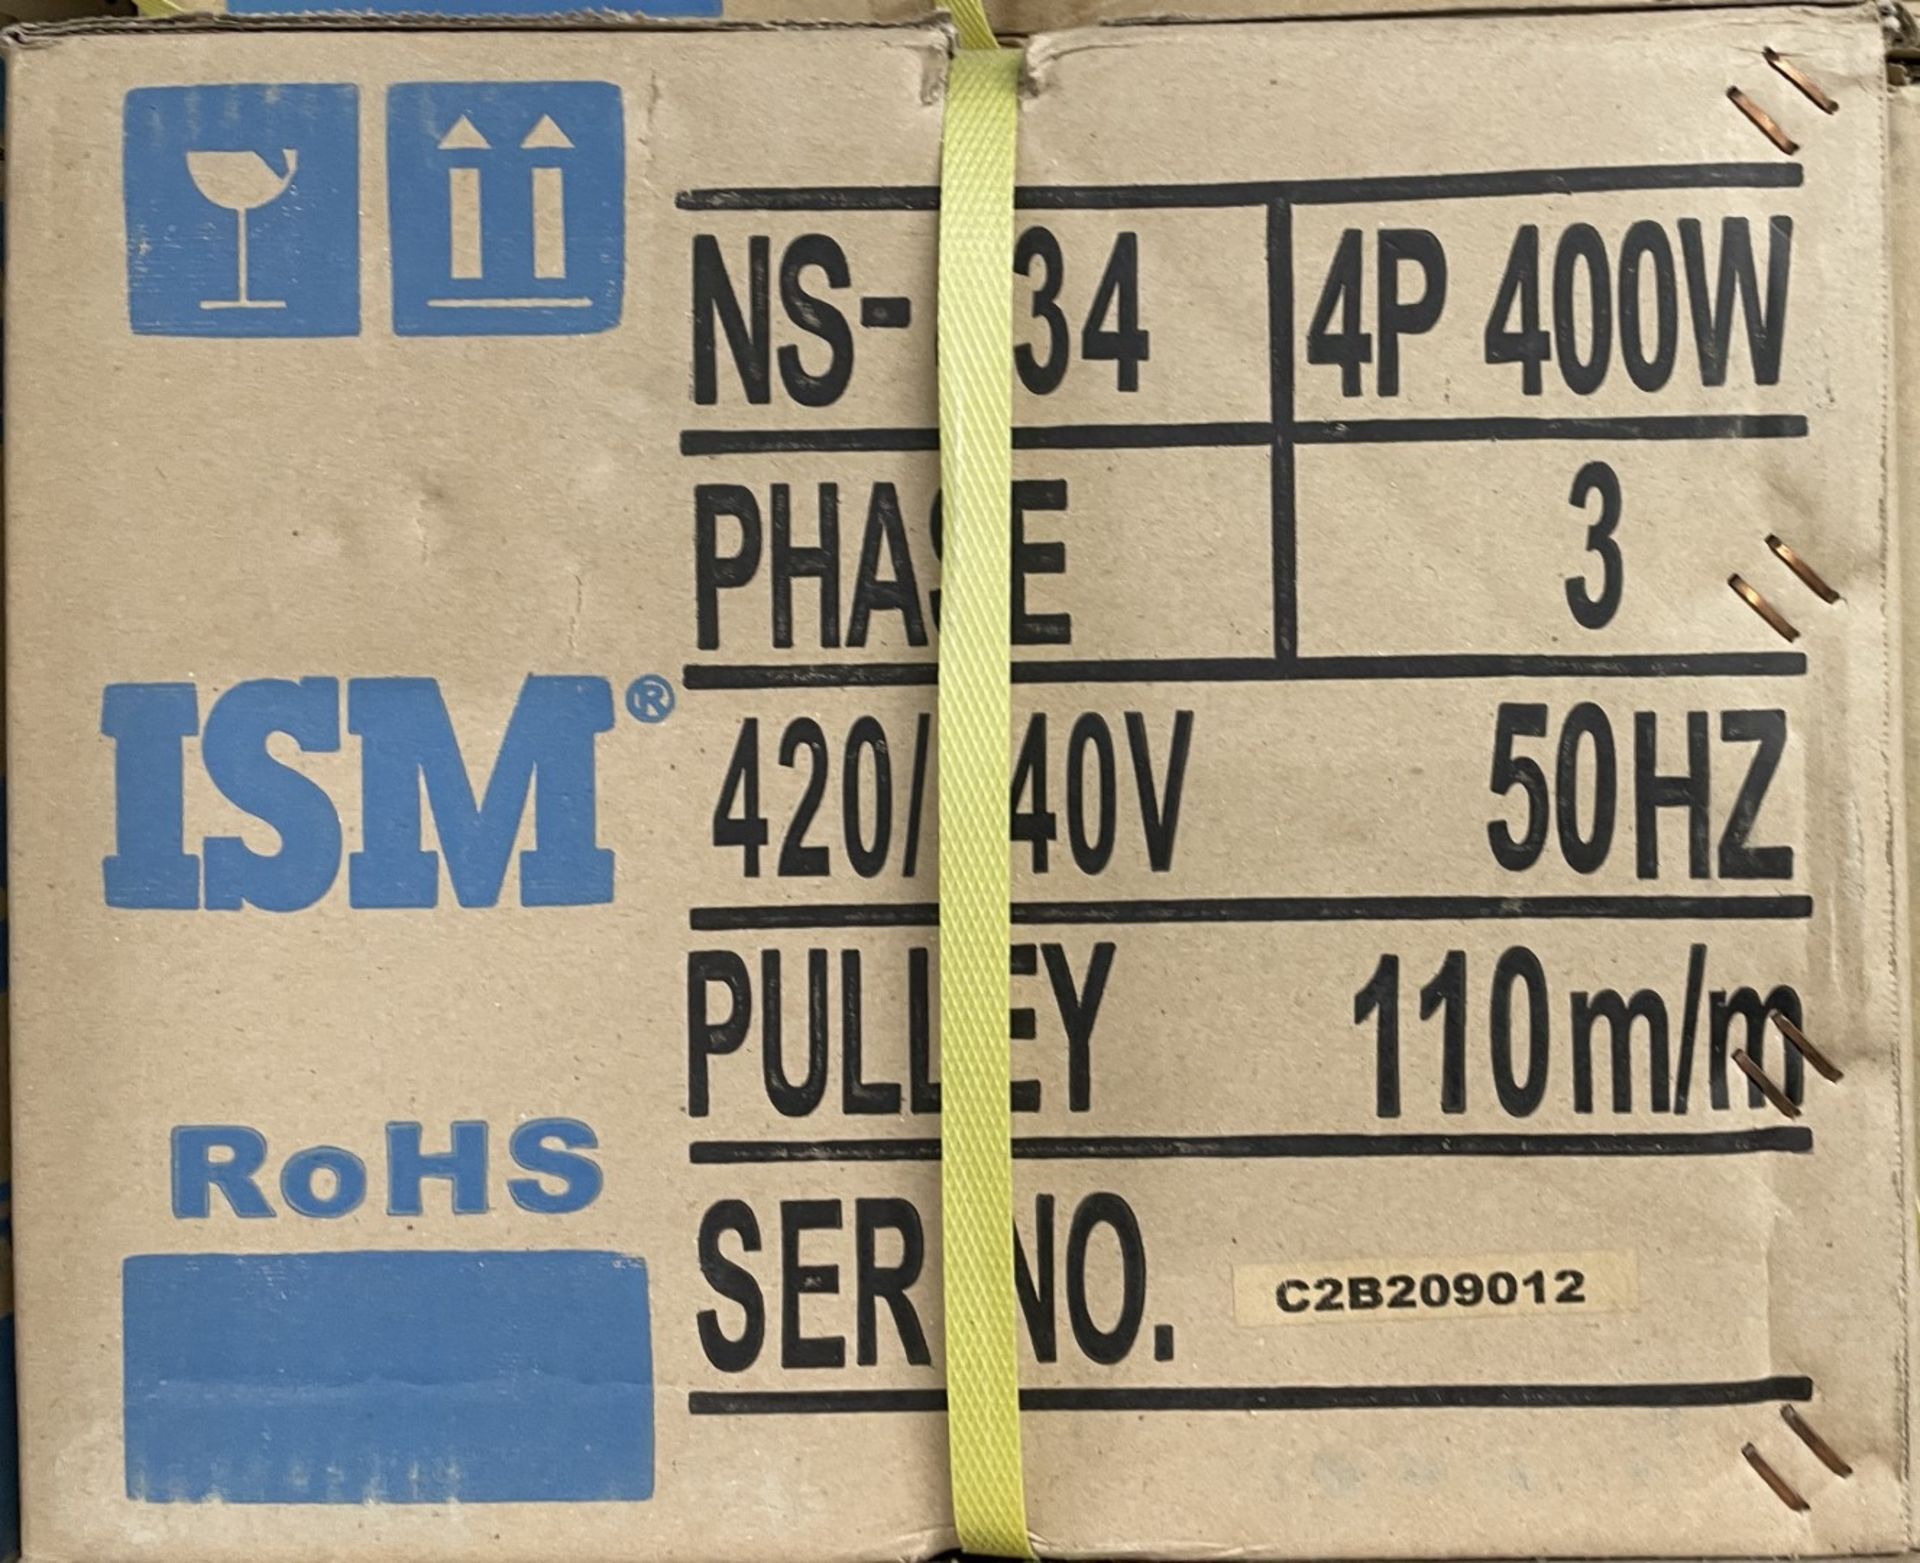 4 x ISM NS-434 Sewing Machine Clutch Motors - 3 Phase 420/440V 4P 400W - New Boxed Stock - Ref: - Image 2 of 8